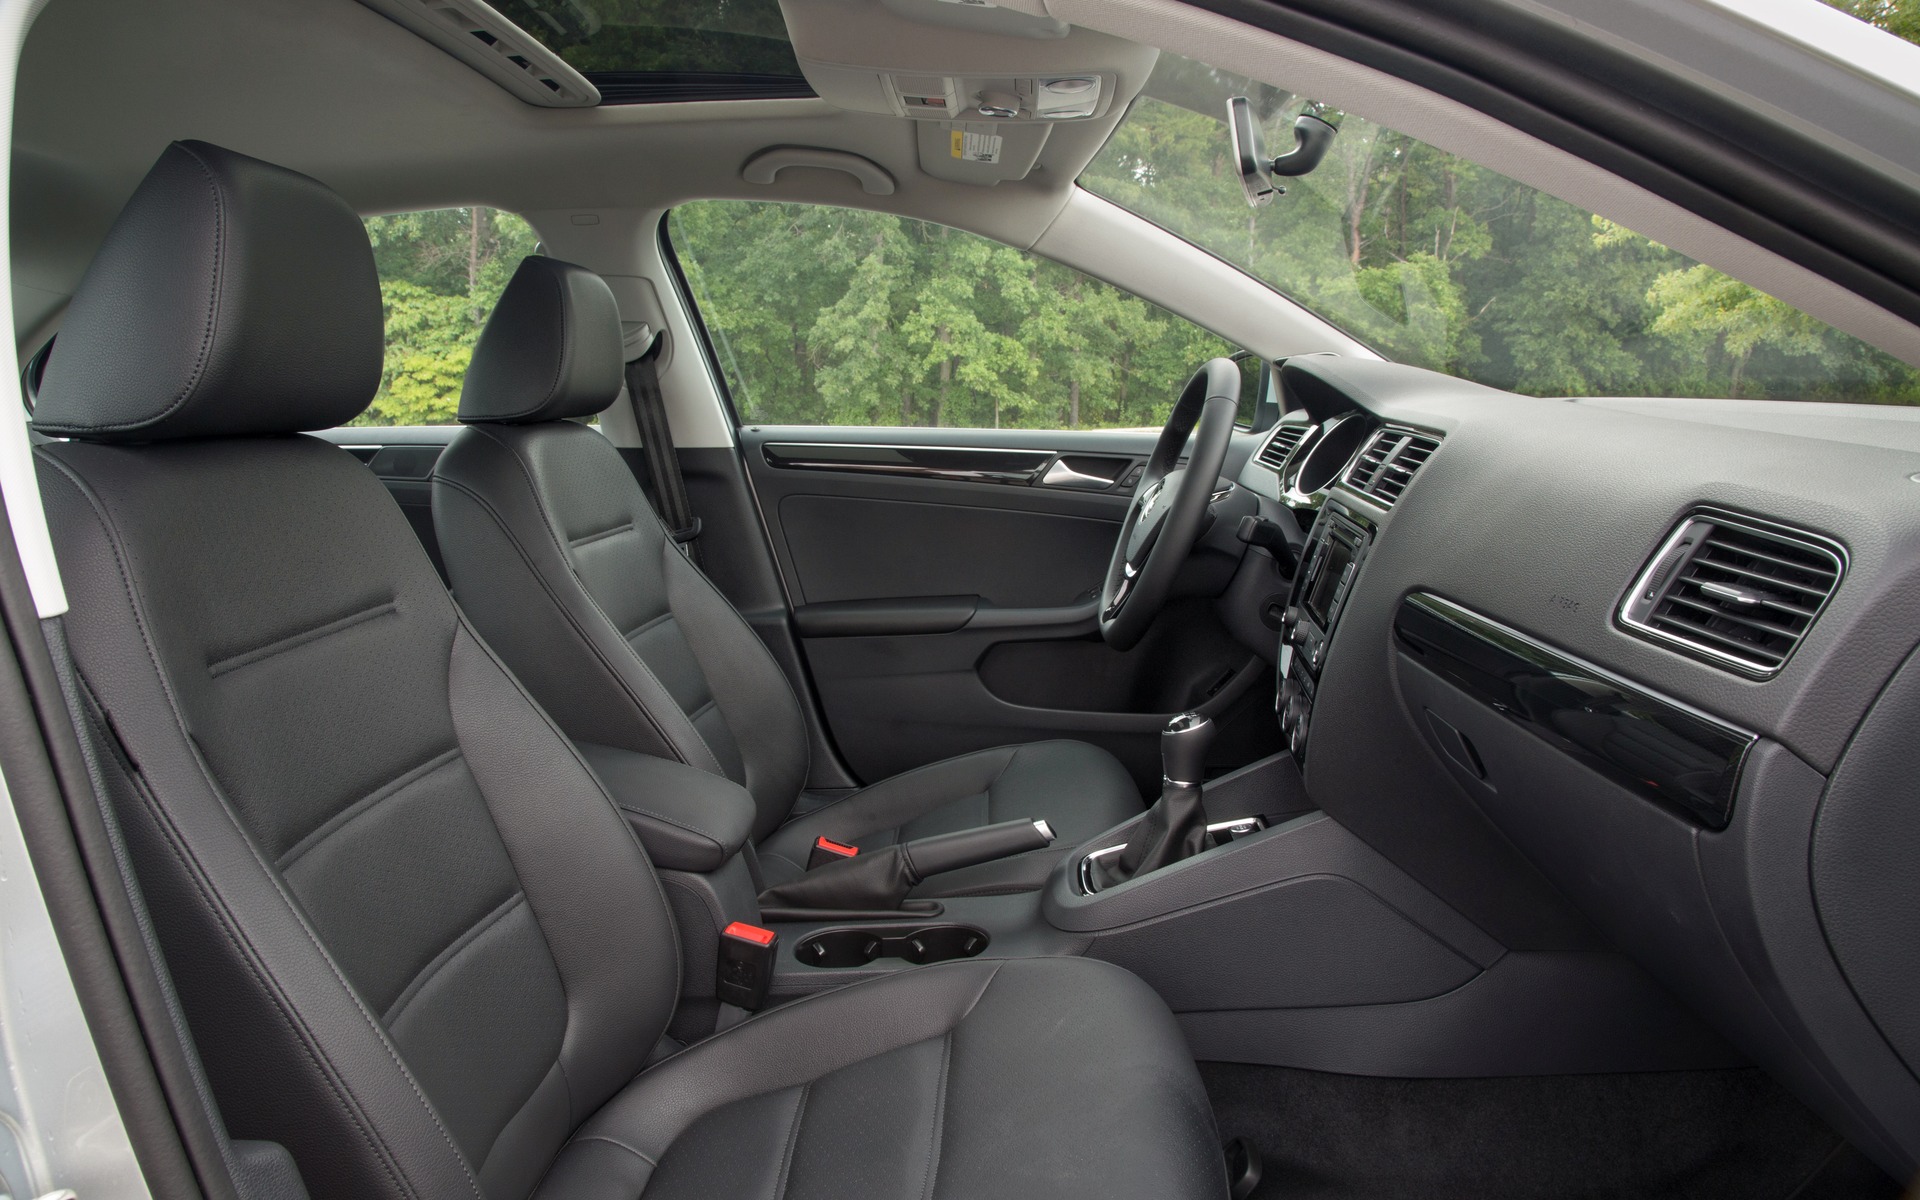 The interior now looks more upmarket, with piano black accents.